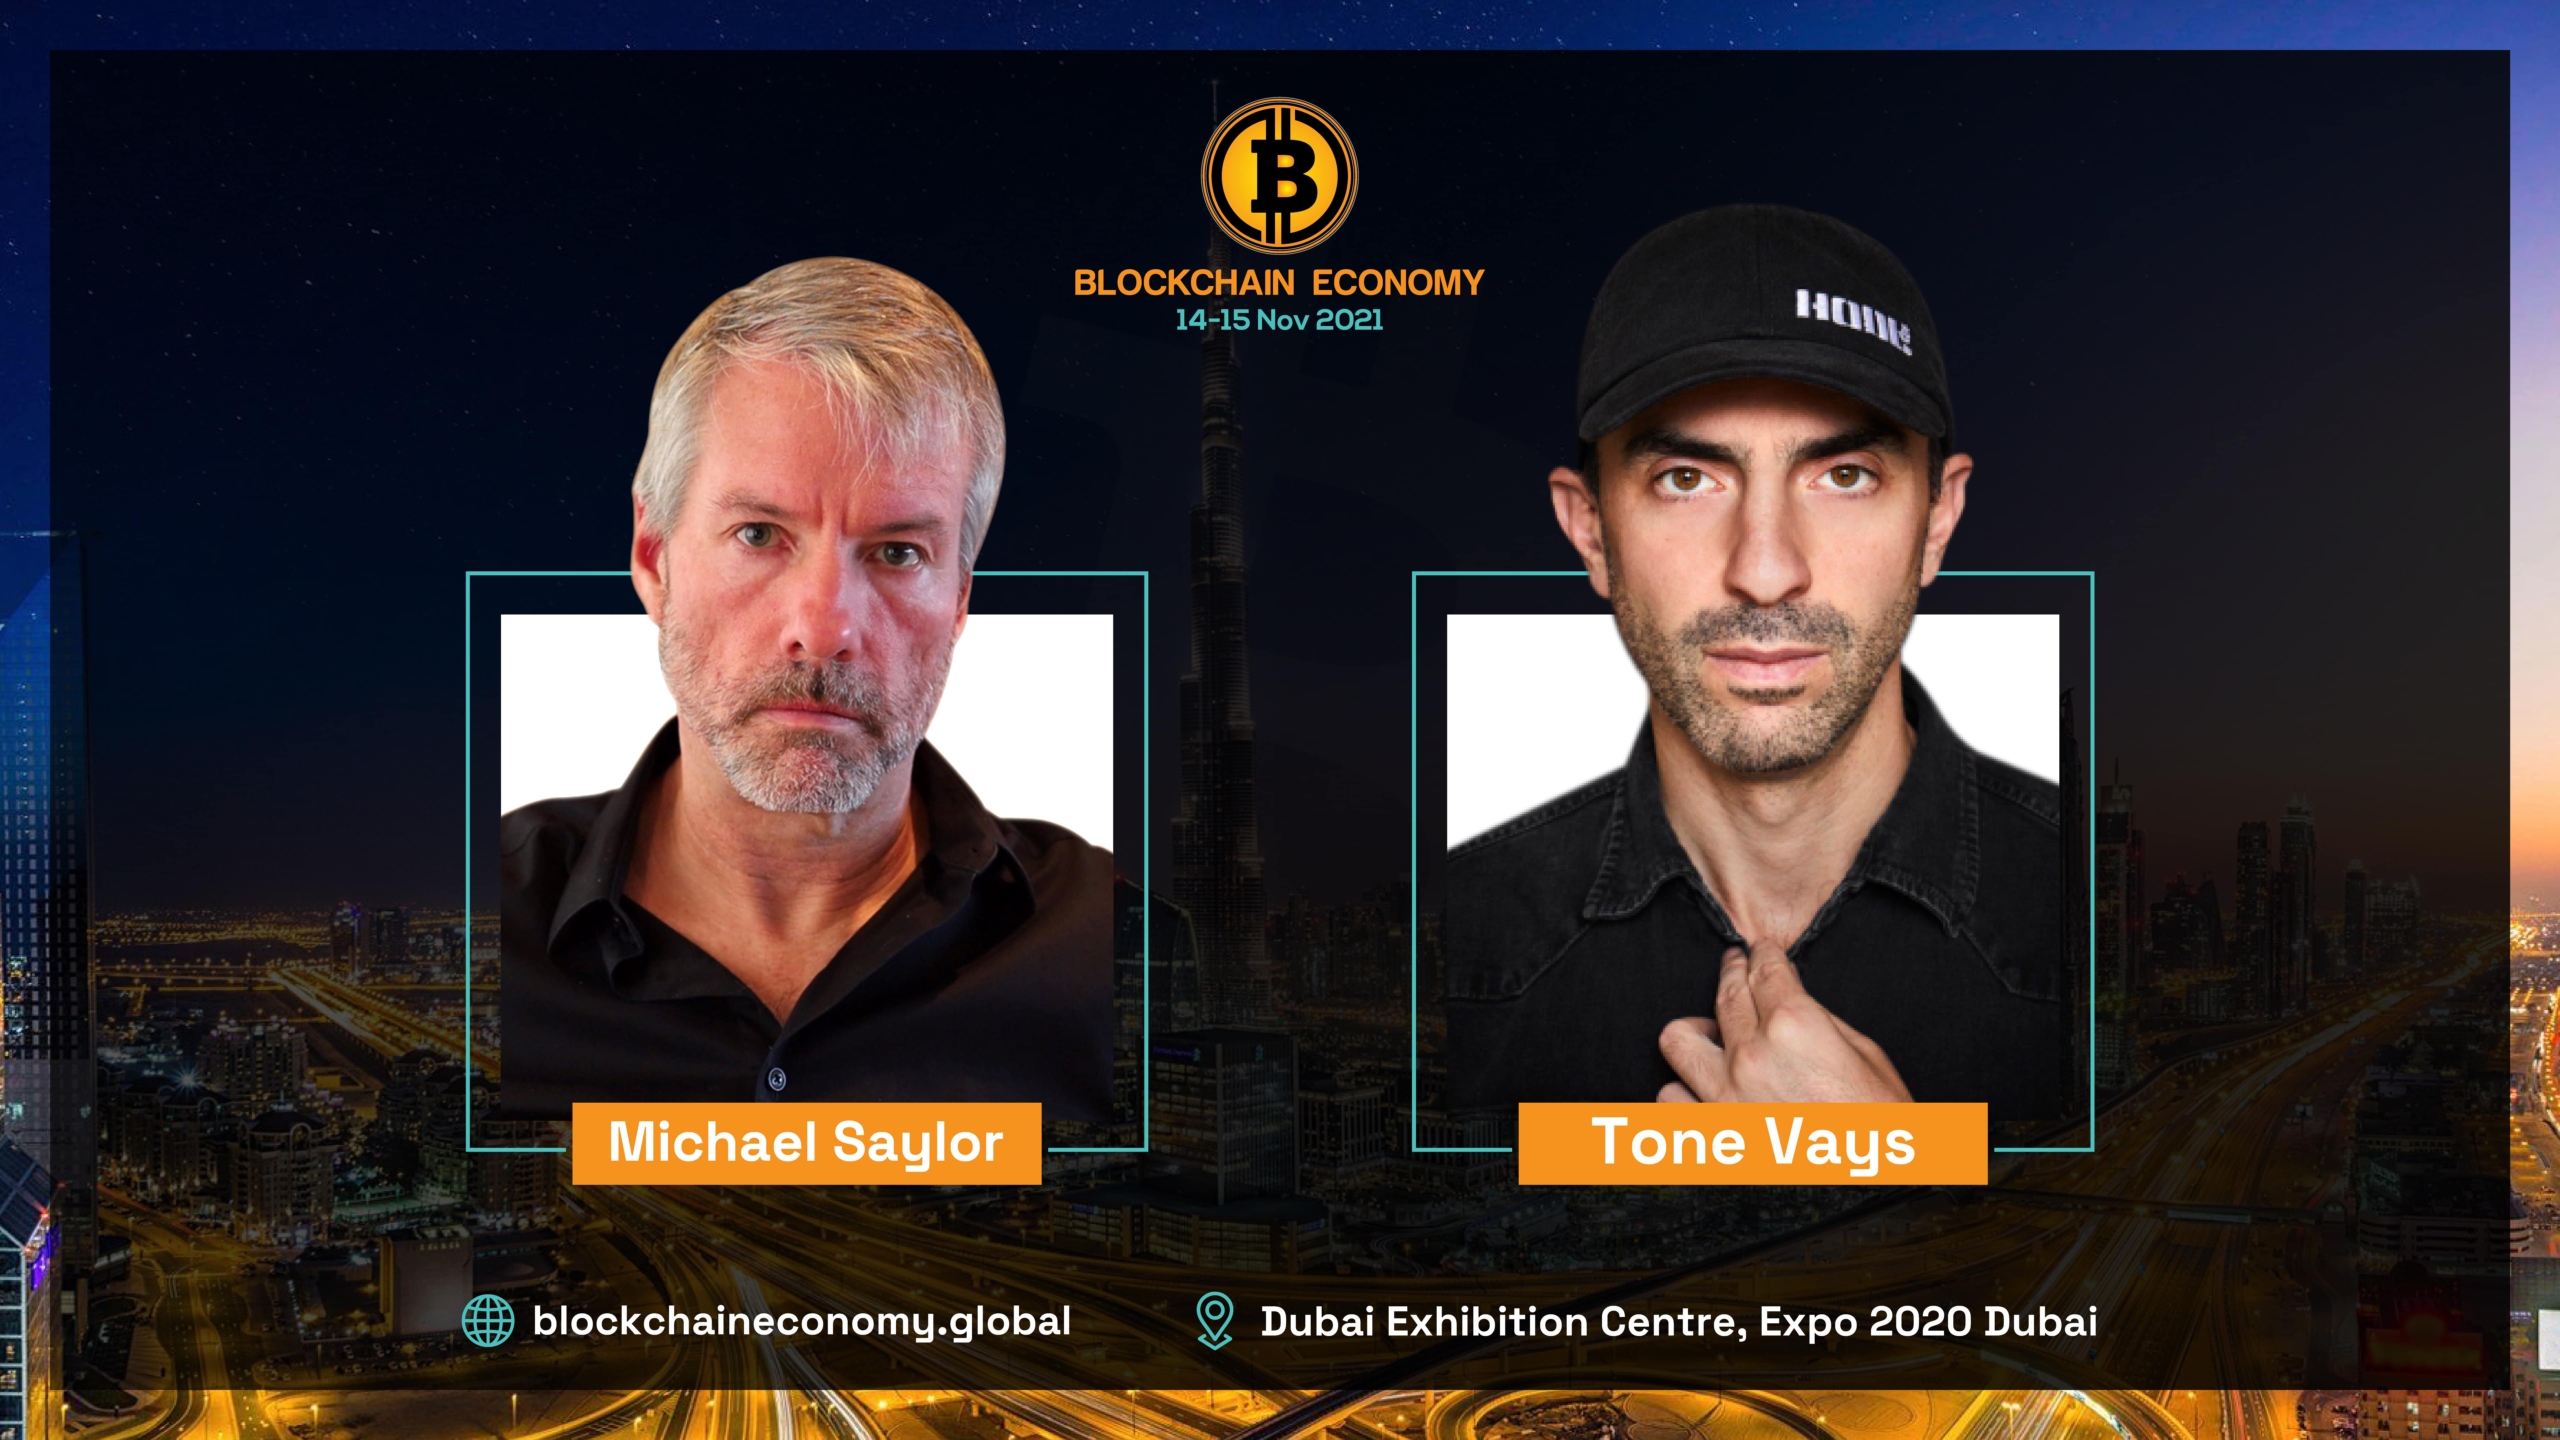 THE FIRST BLOCKCHAIN EVENT AT THE WORLD EXPO IS STARTING SOON